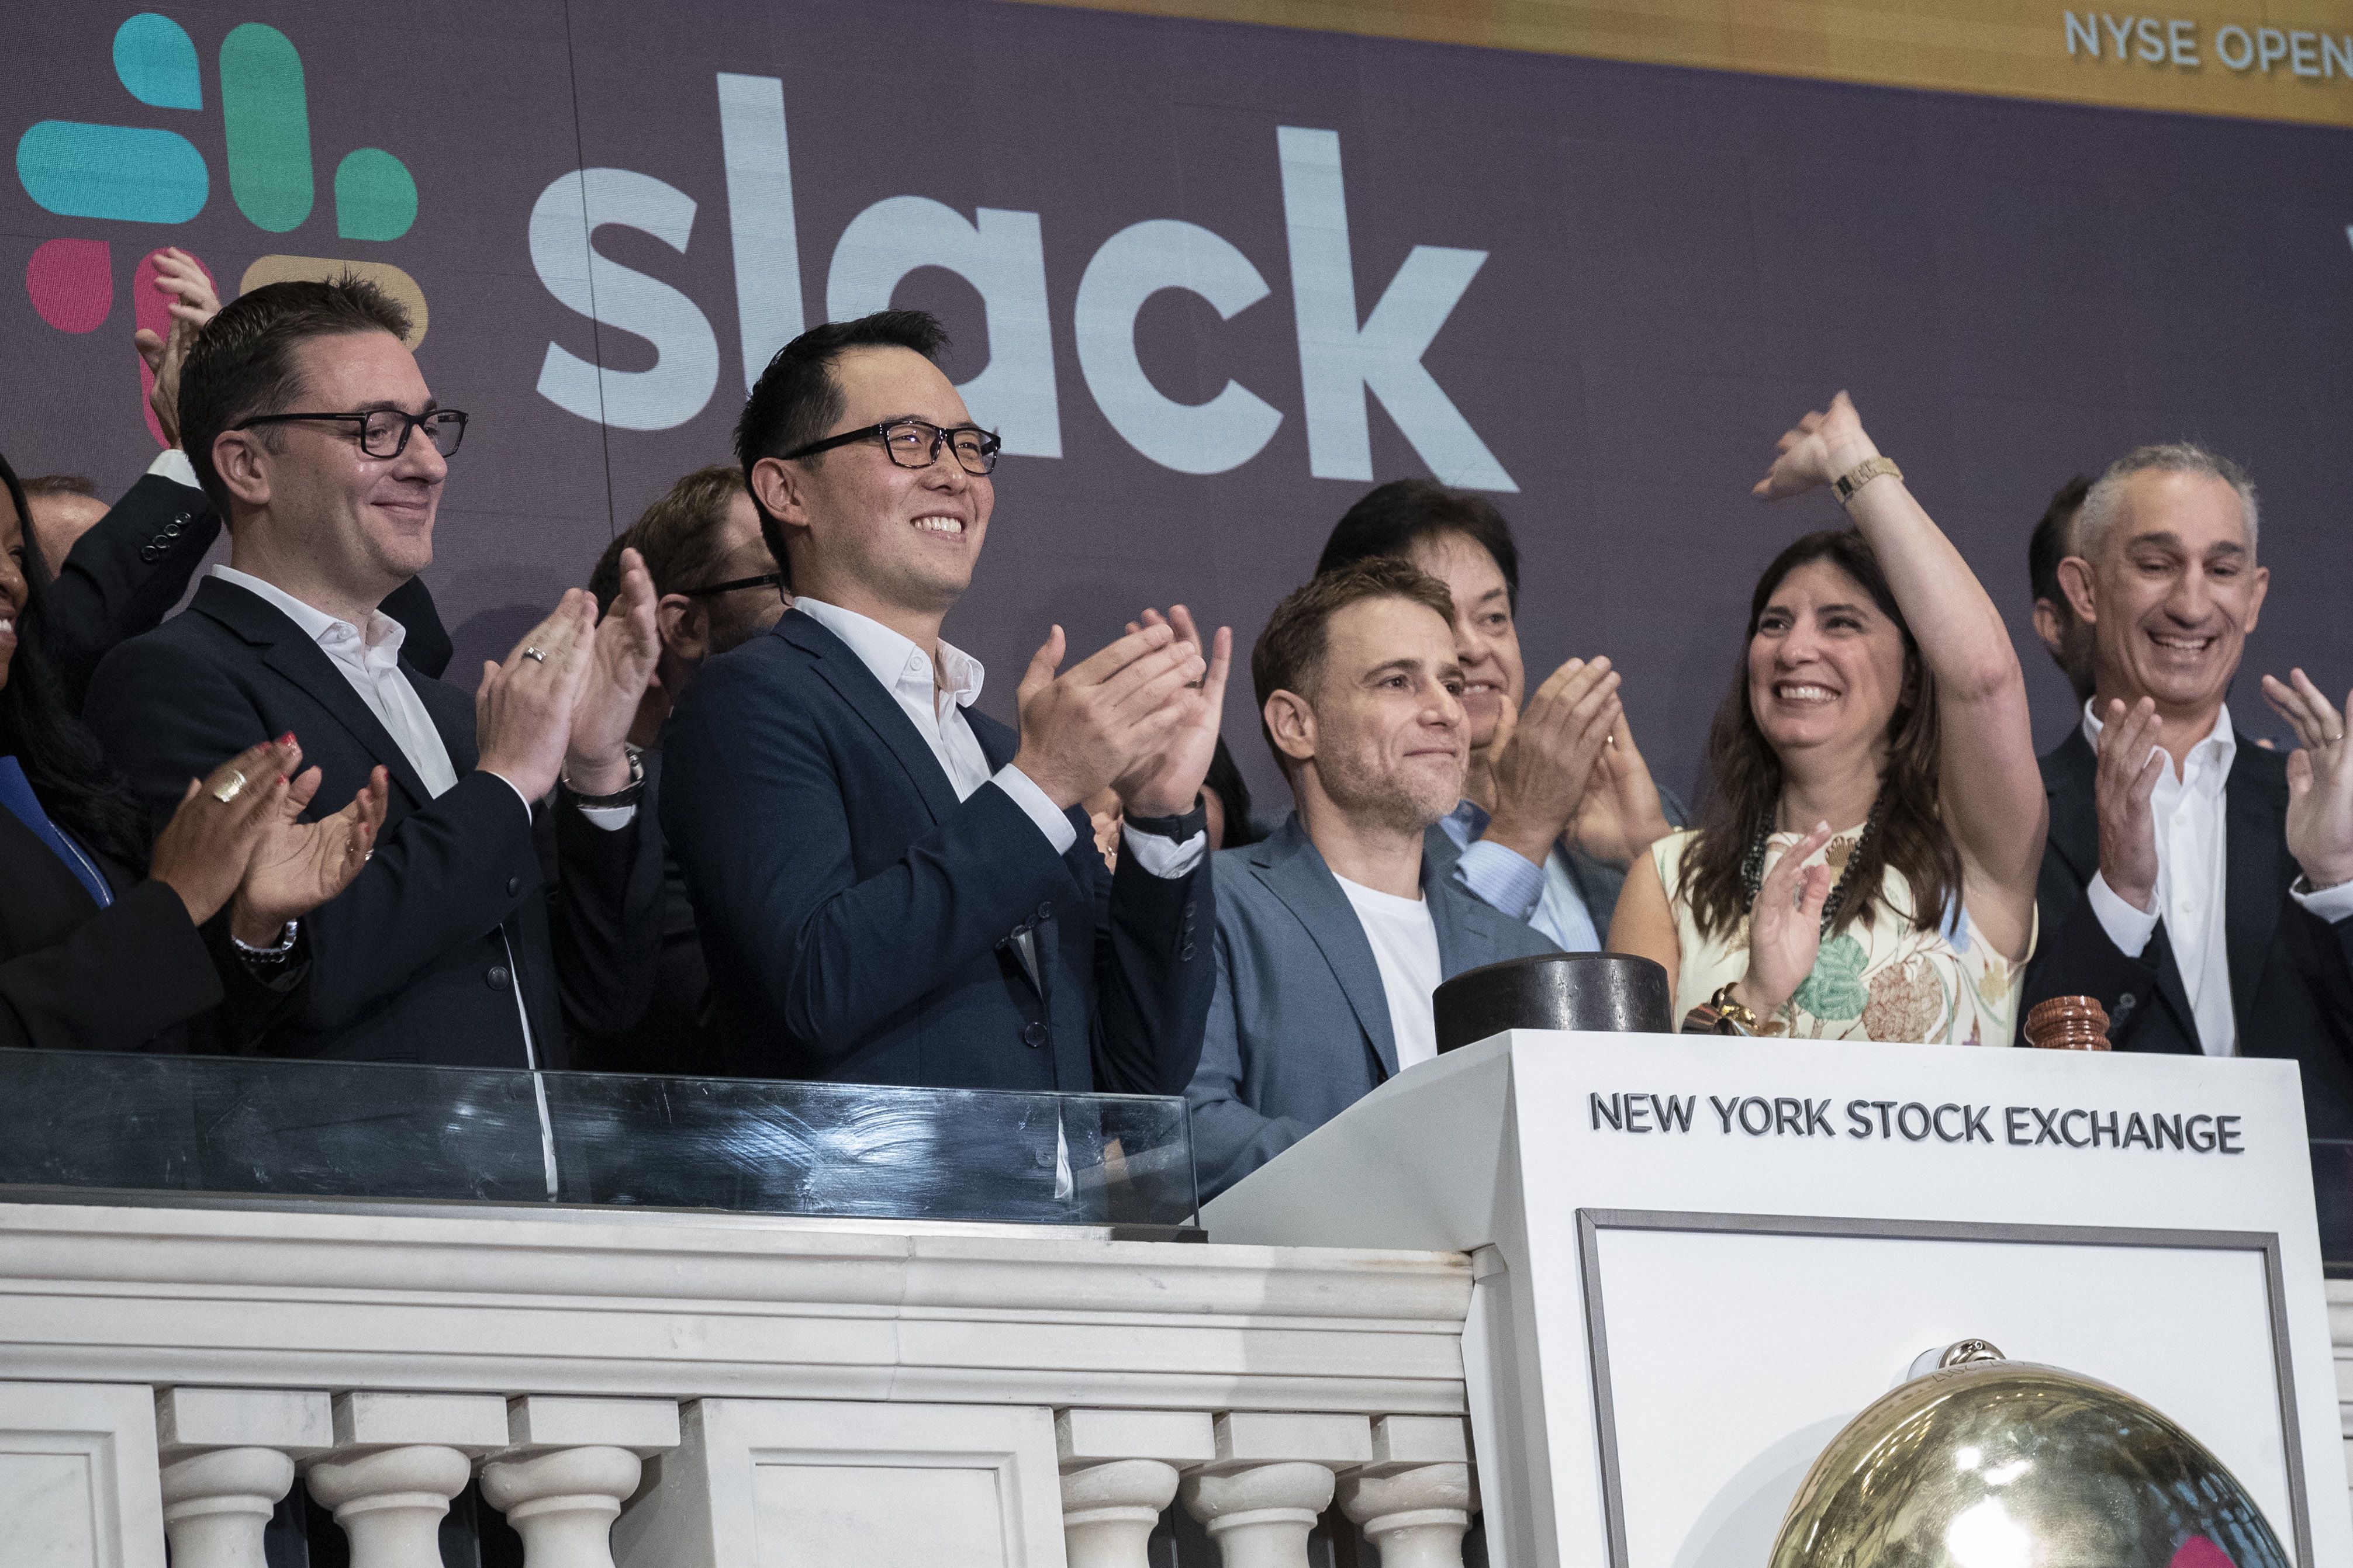 Roblox Founders, Investors Have Stakes Worth Billions